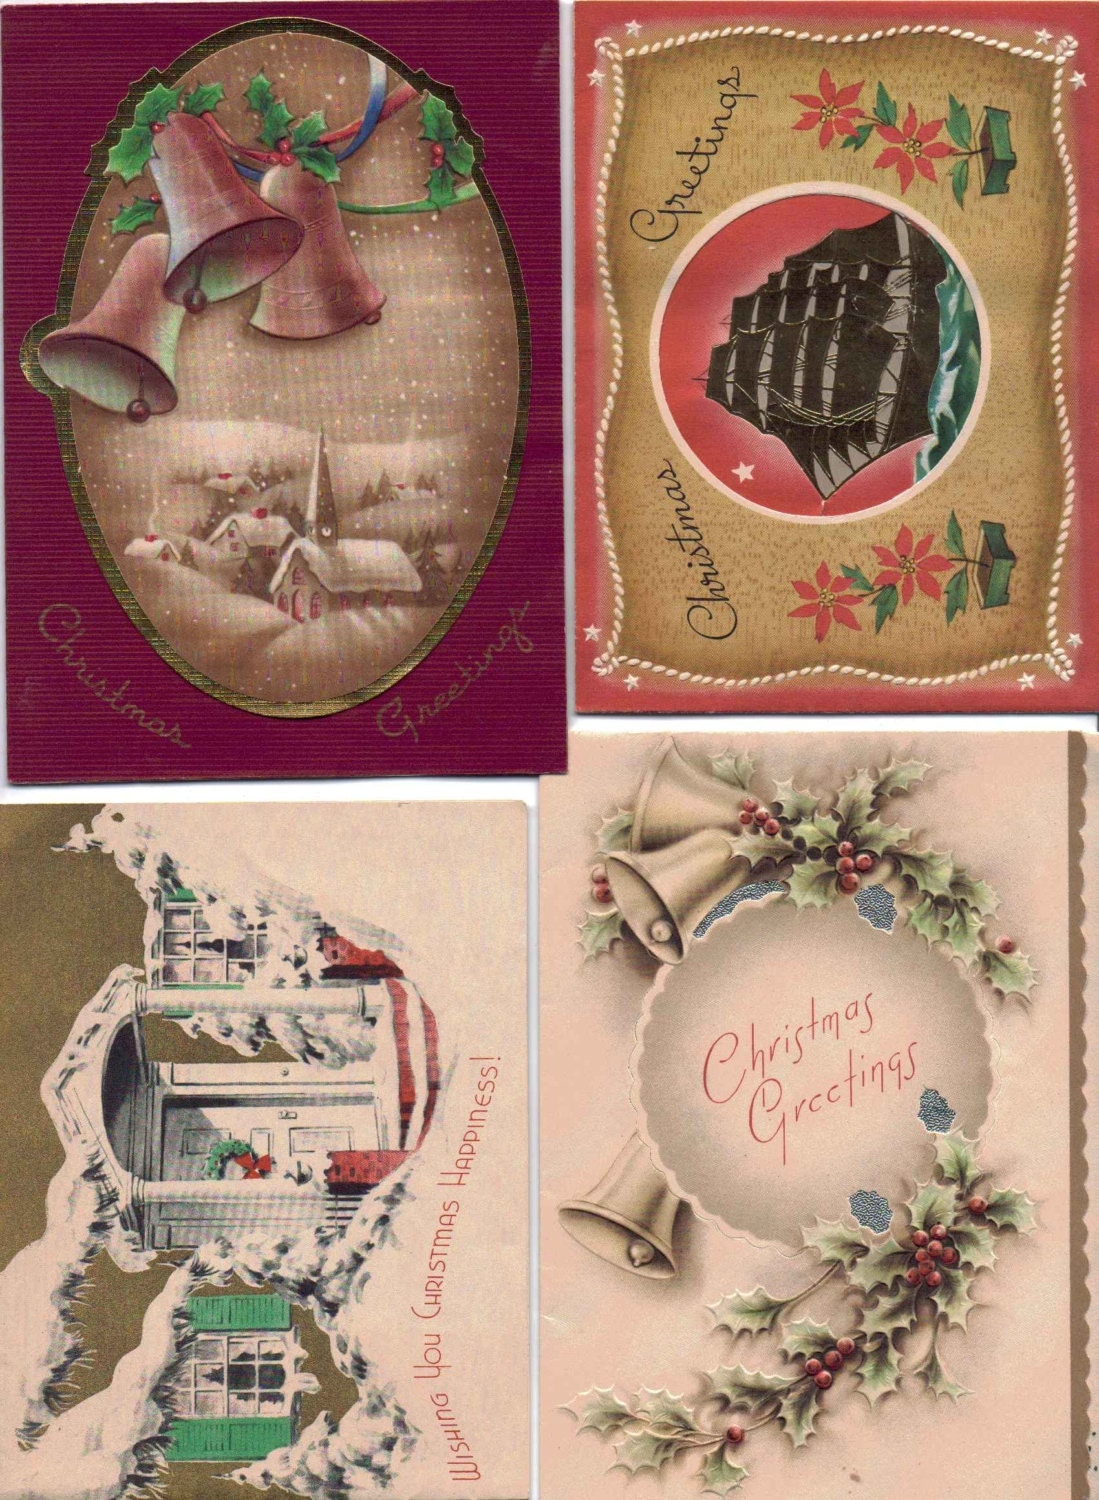 Vintage 1940's Christmas Cards Set of 4 by InAnotherLifeVintage